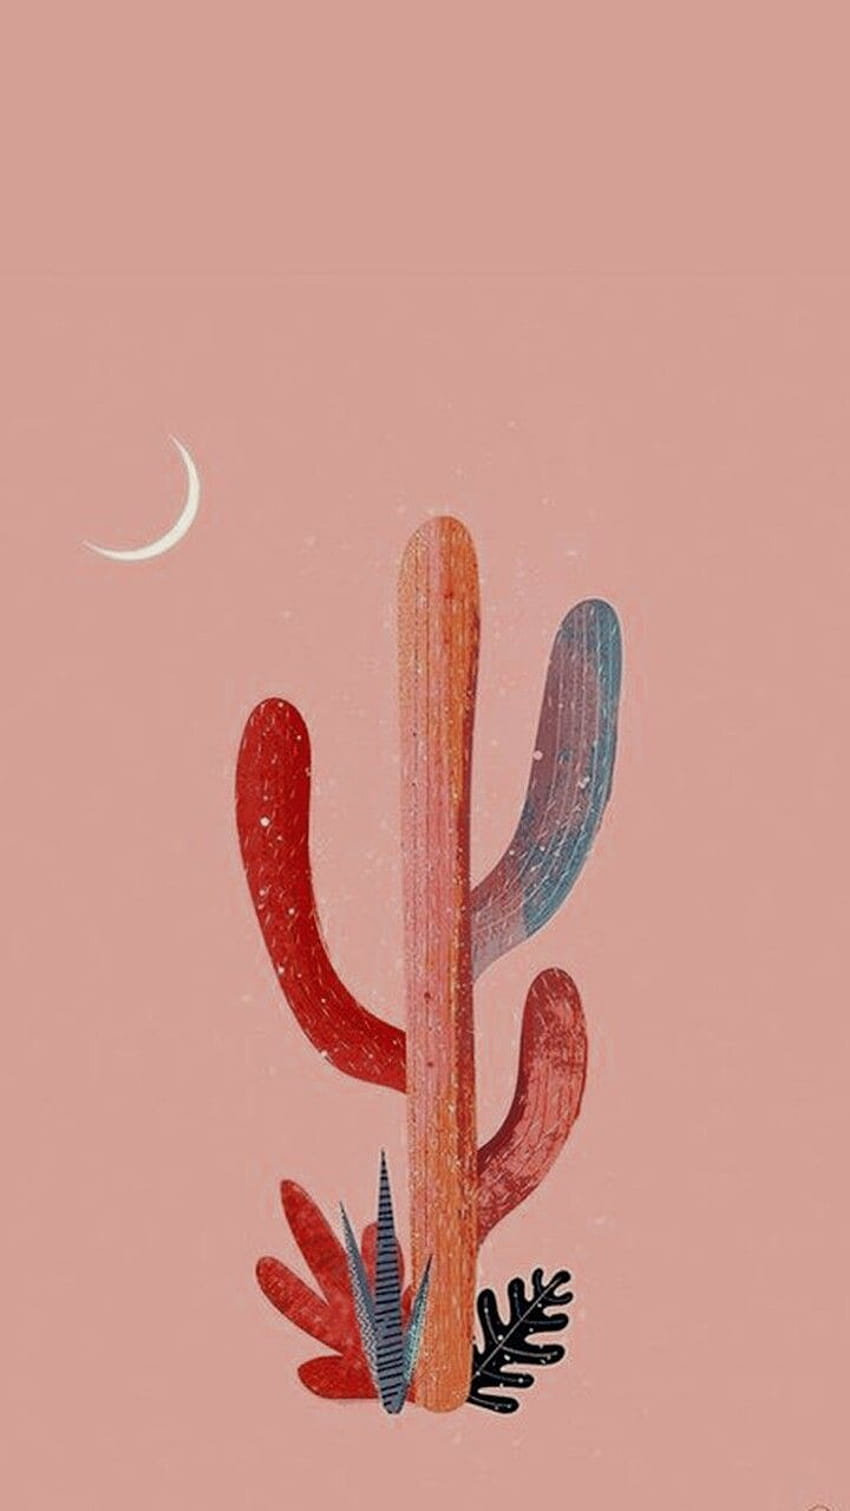 Pinterest Aesthetic posted by John Tremblay, cactus pink aesthetic HD phone wallpaper